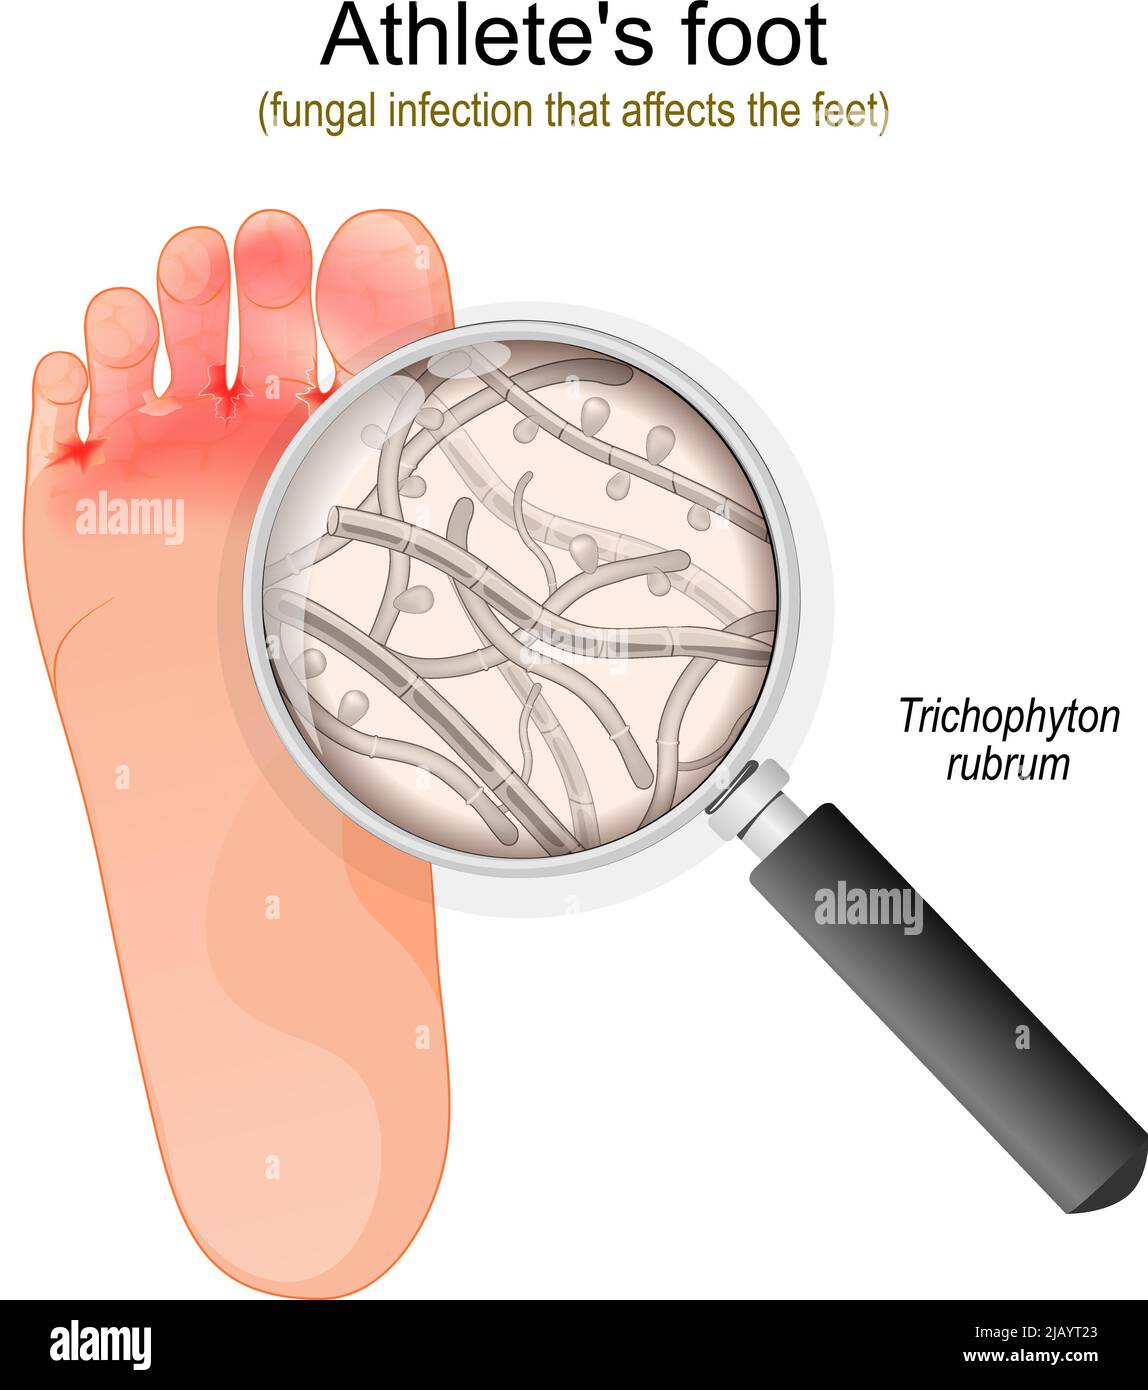 Athlete's foot. fungal infection that affects the feet. Close-up of Trichophyton rubrum fungi. vector illustration Stock Vector